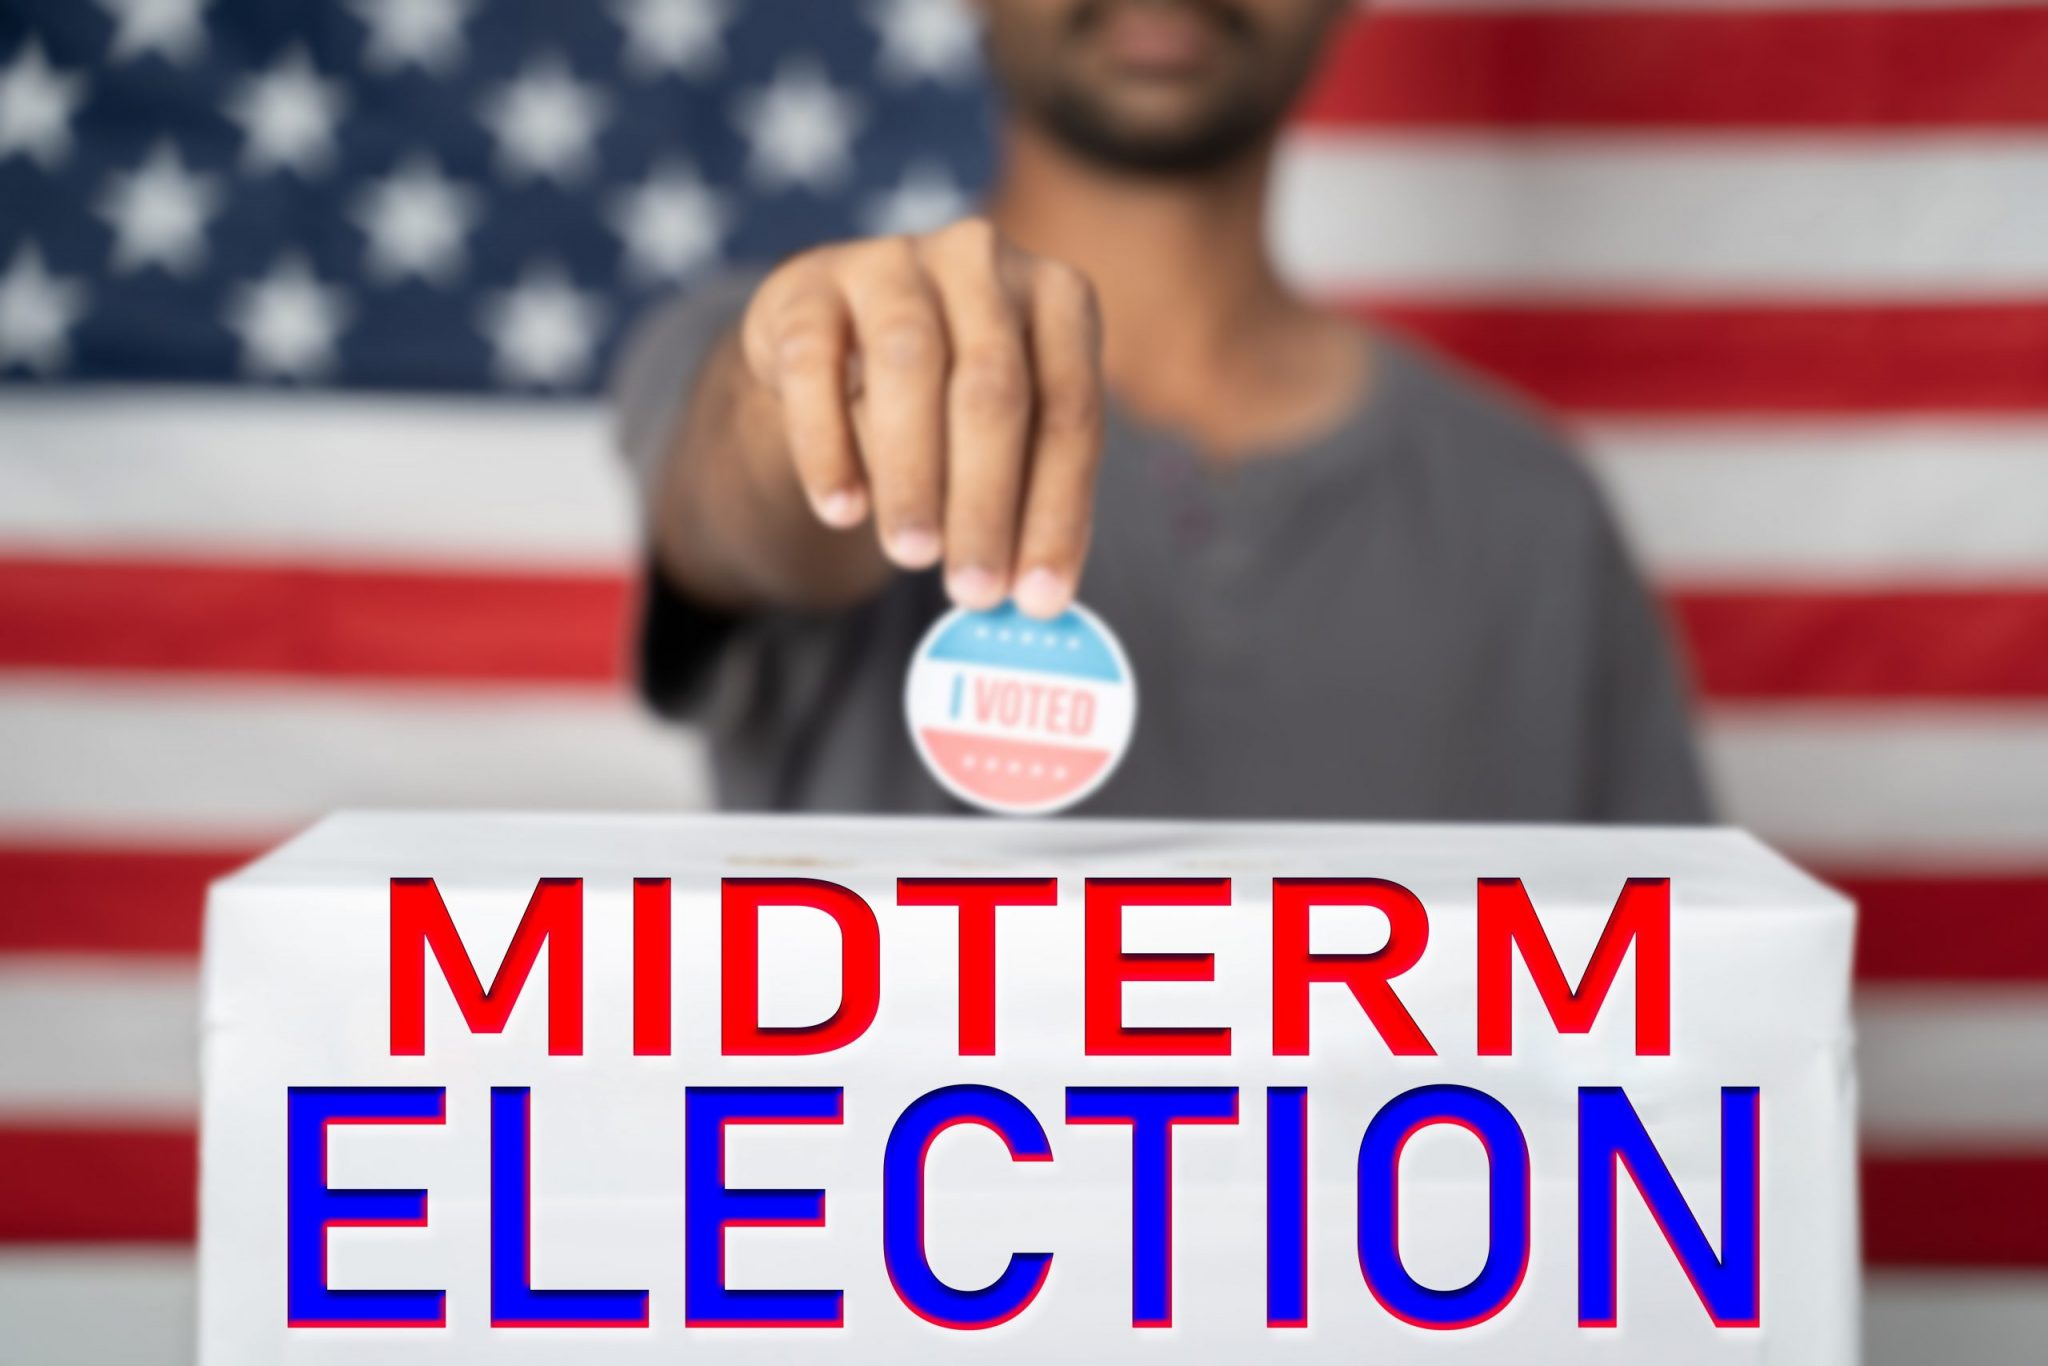 focus on Midterm election, Concept of 2022 American Midterm Elections showing by placing I voted sticker on ballot box with Midterm Election sign in front of US flag